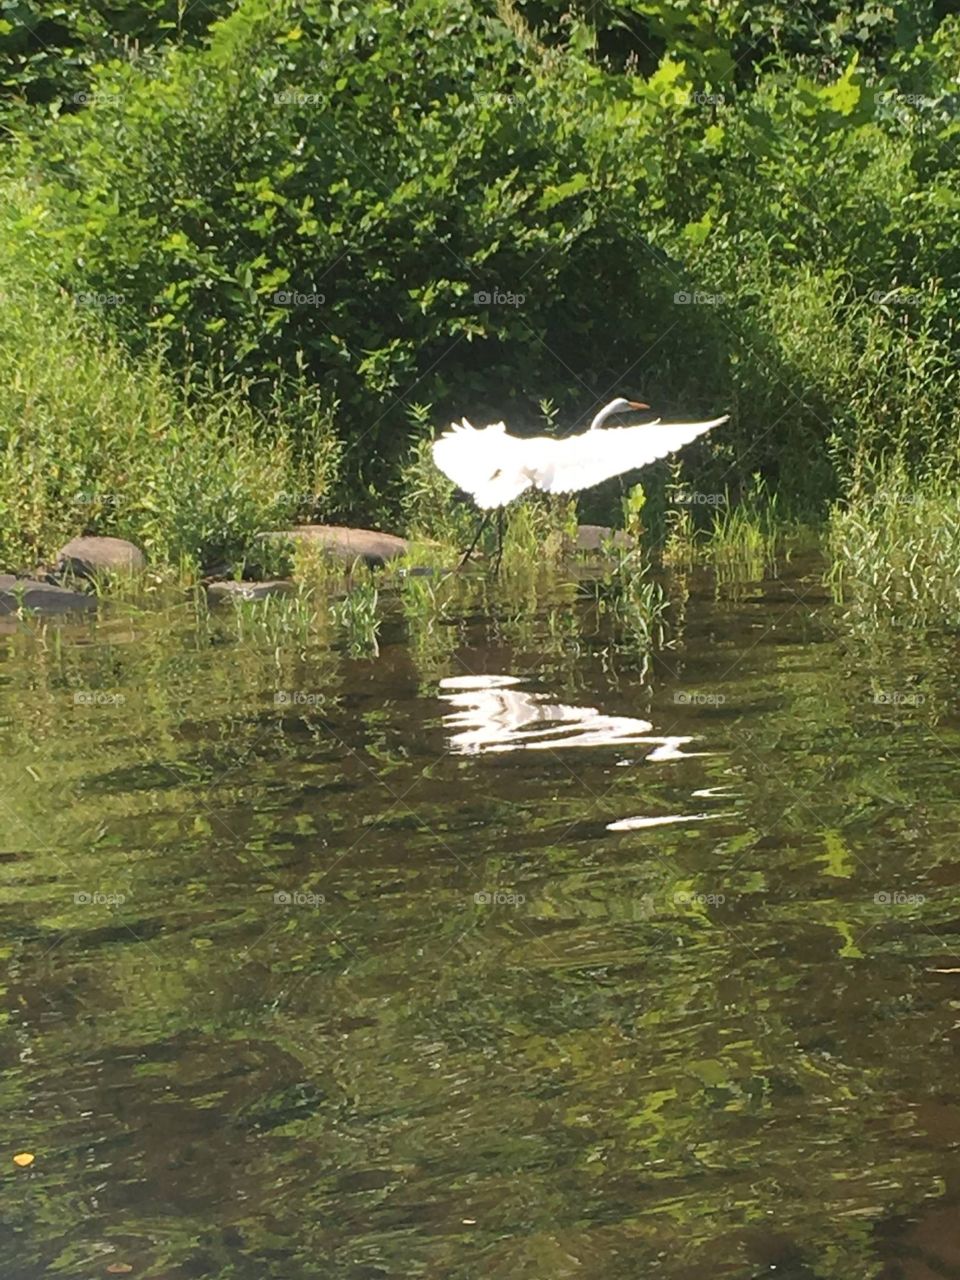 In flight on the river upstate New York 